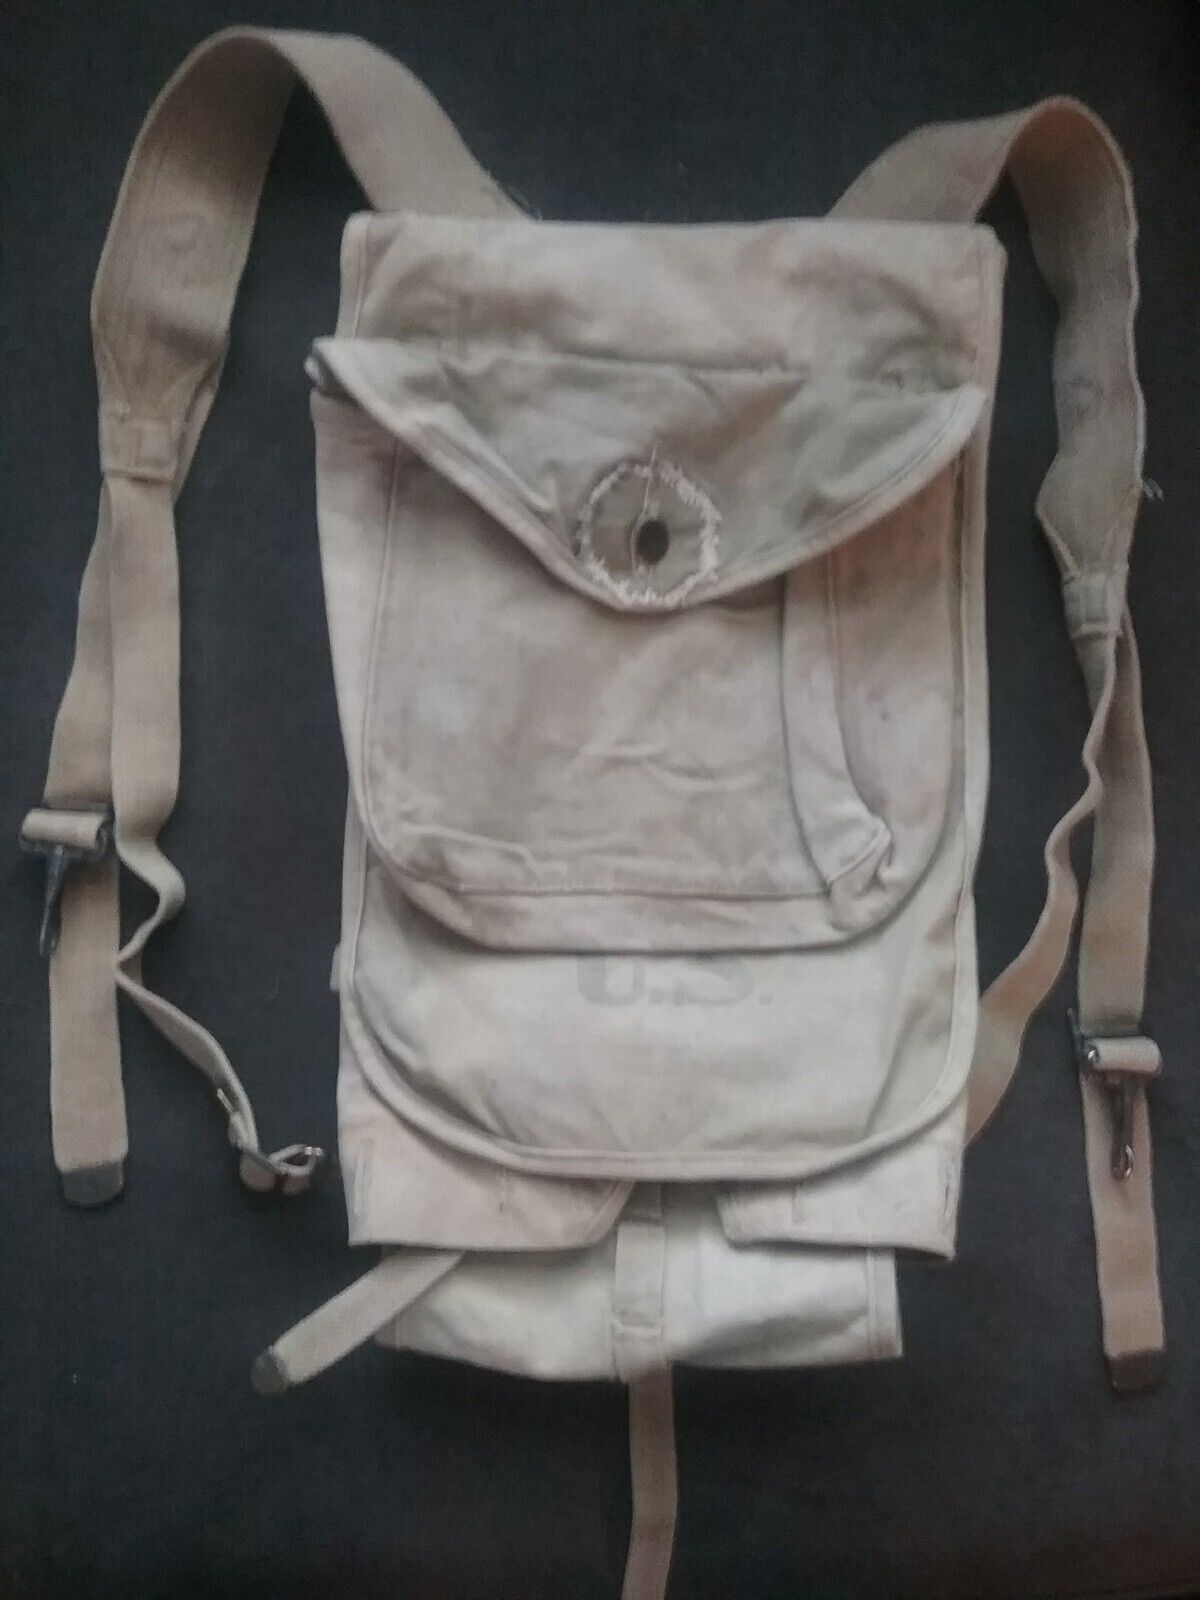 WW1 M-1910 Haversack Dated 1918, With Meat Can Pouch, Genuine USGI Surplus Used